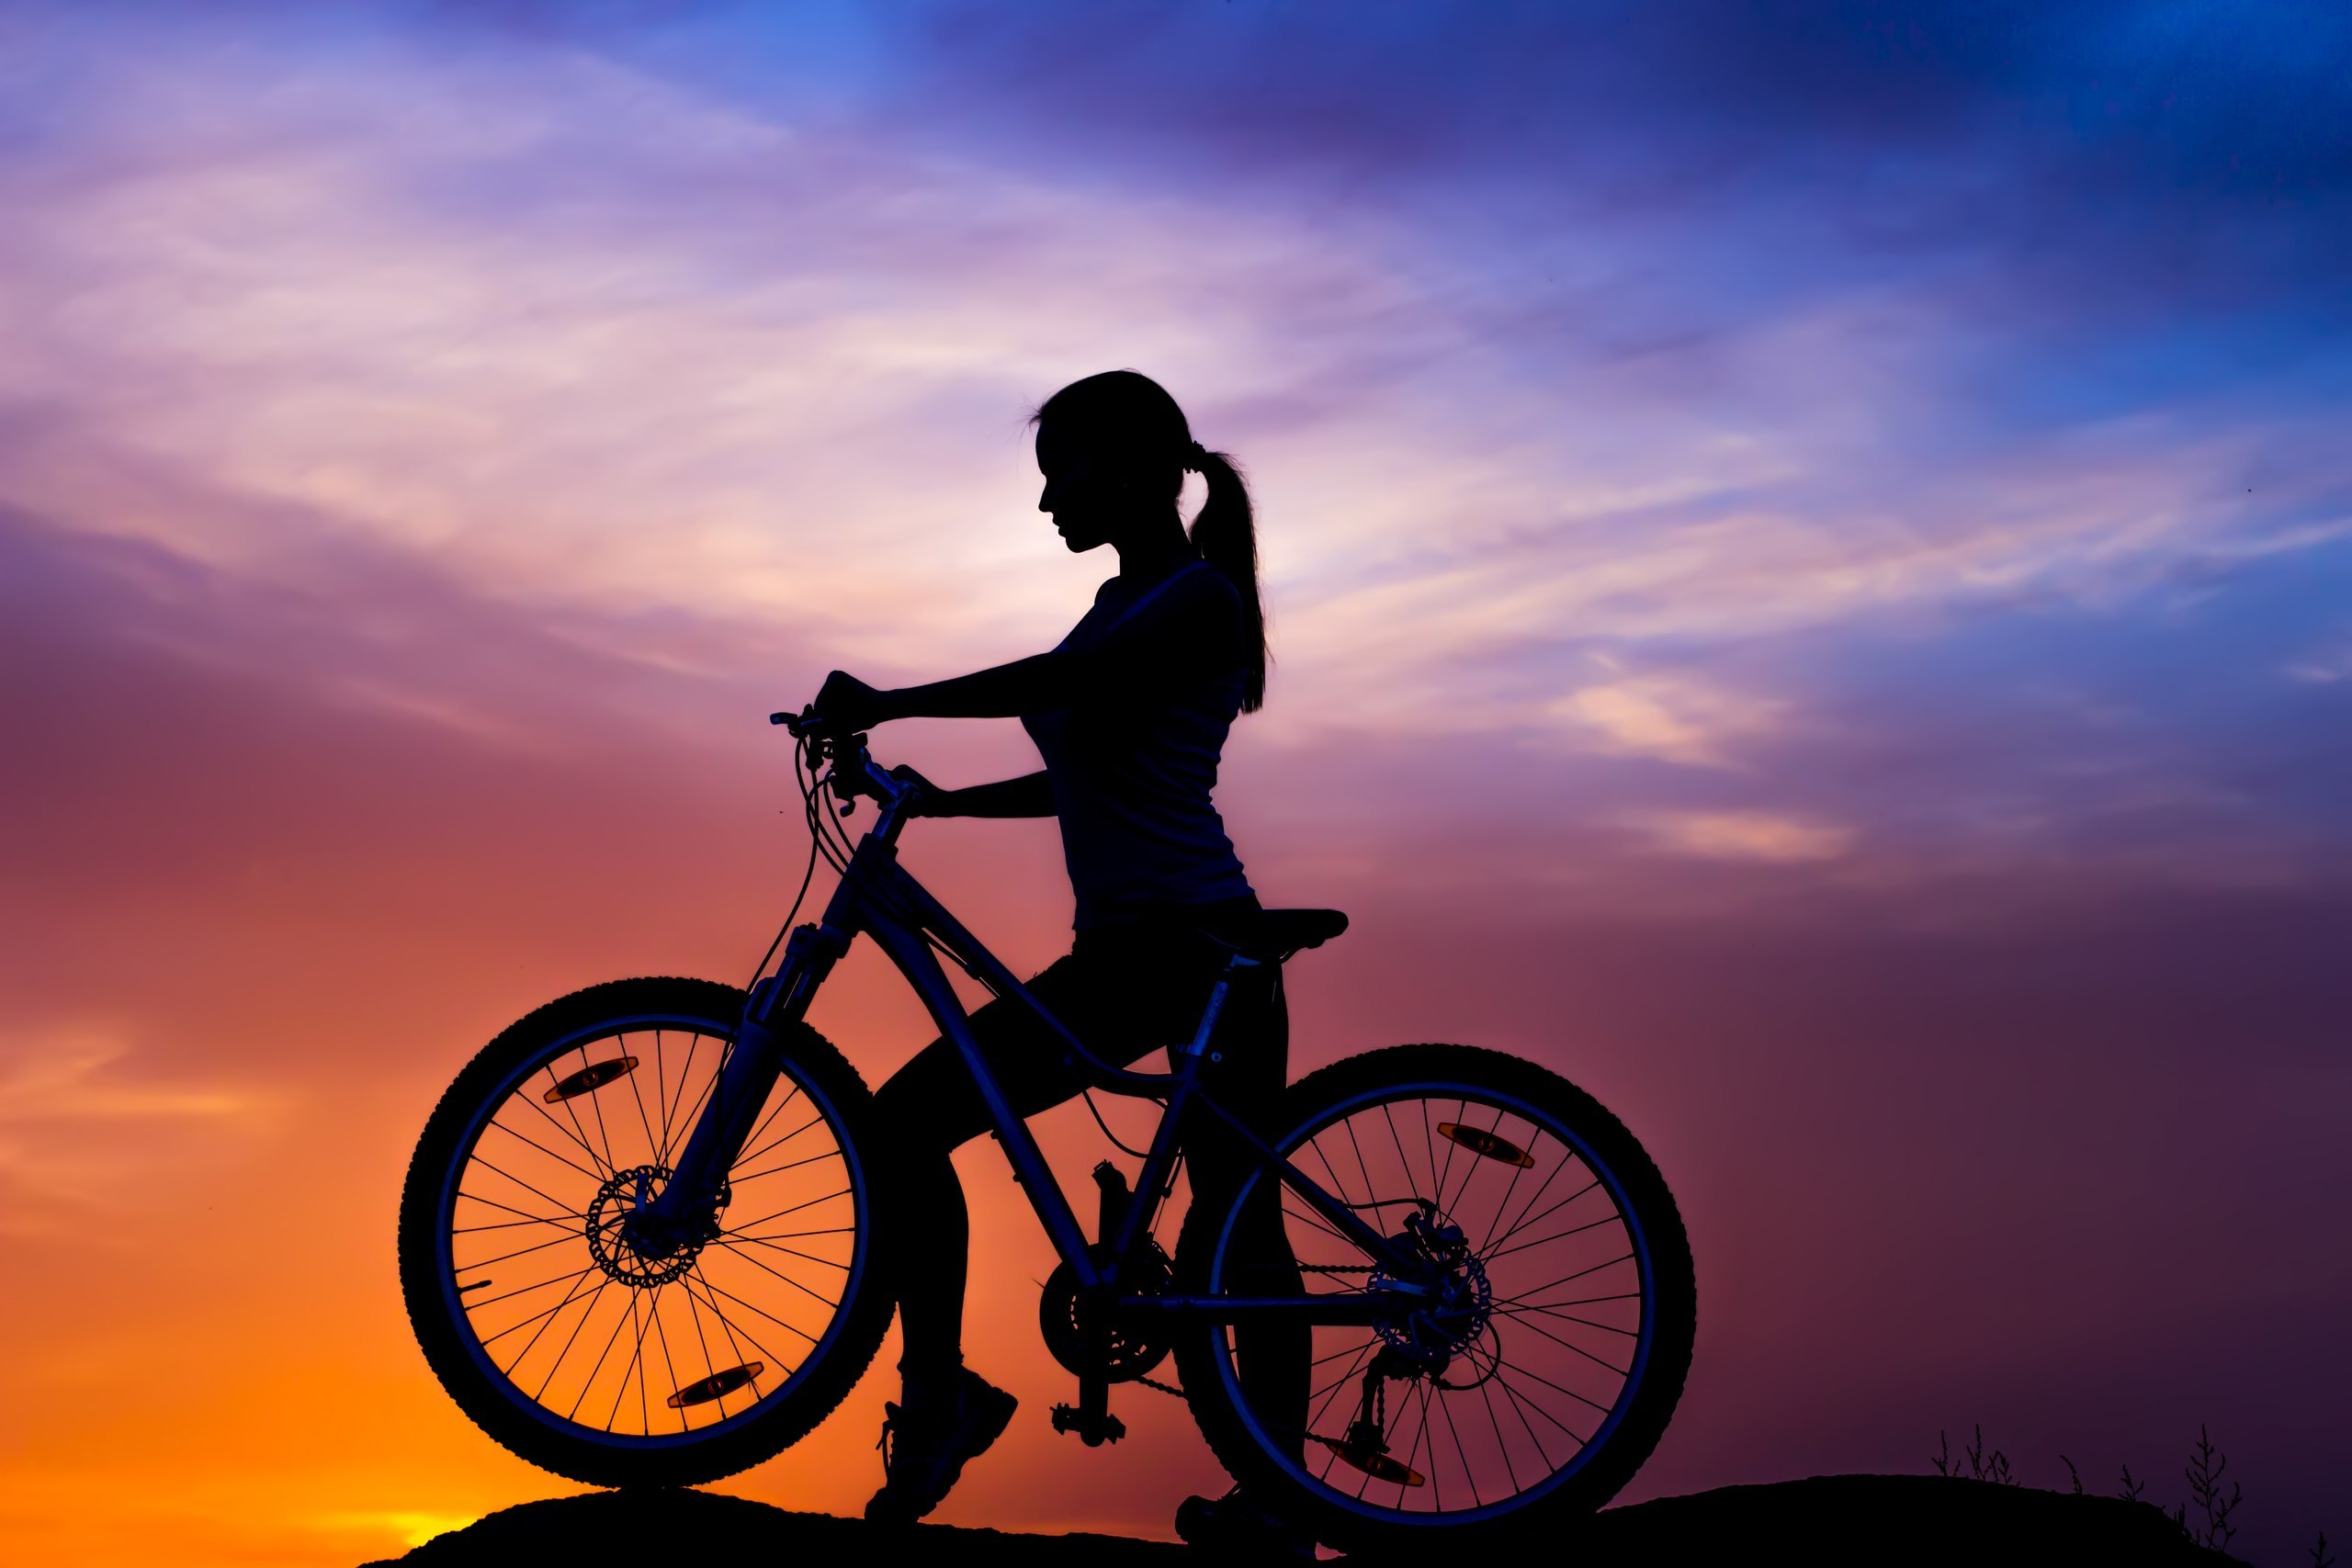 pretty girl with bicycle Stock Photo by prostooleh | PhotoDune